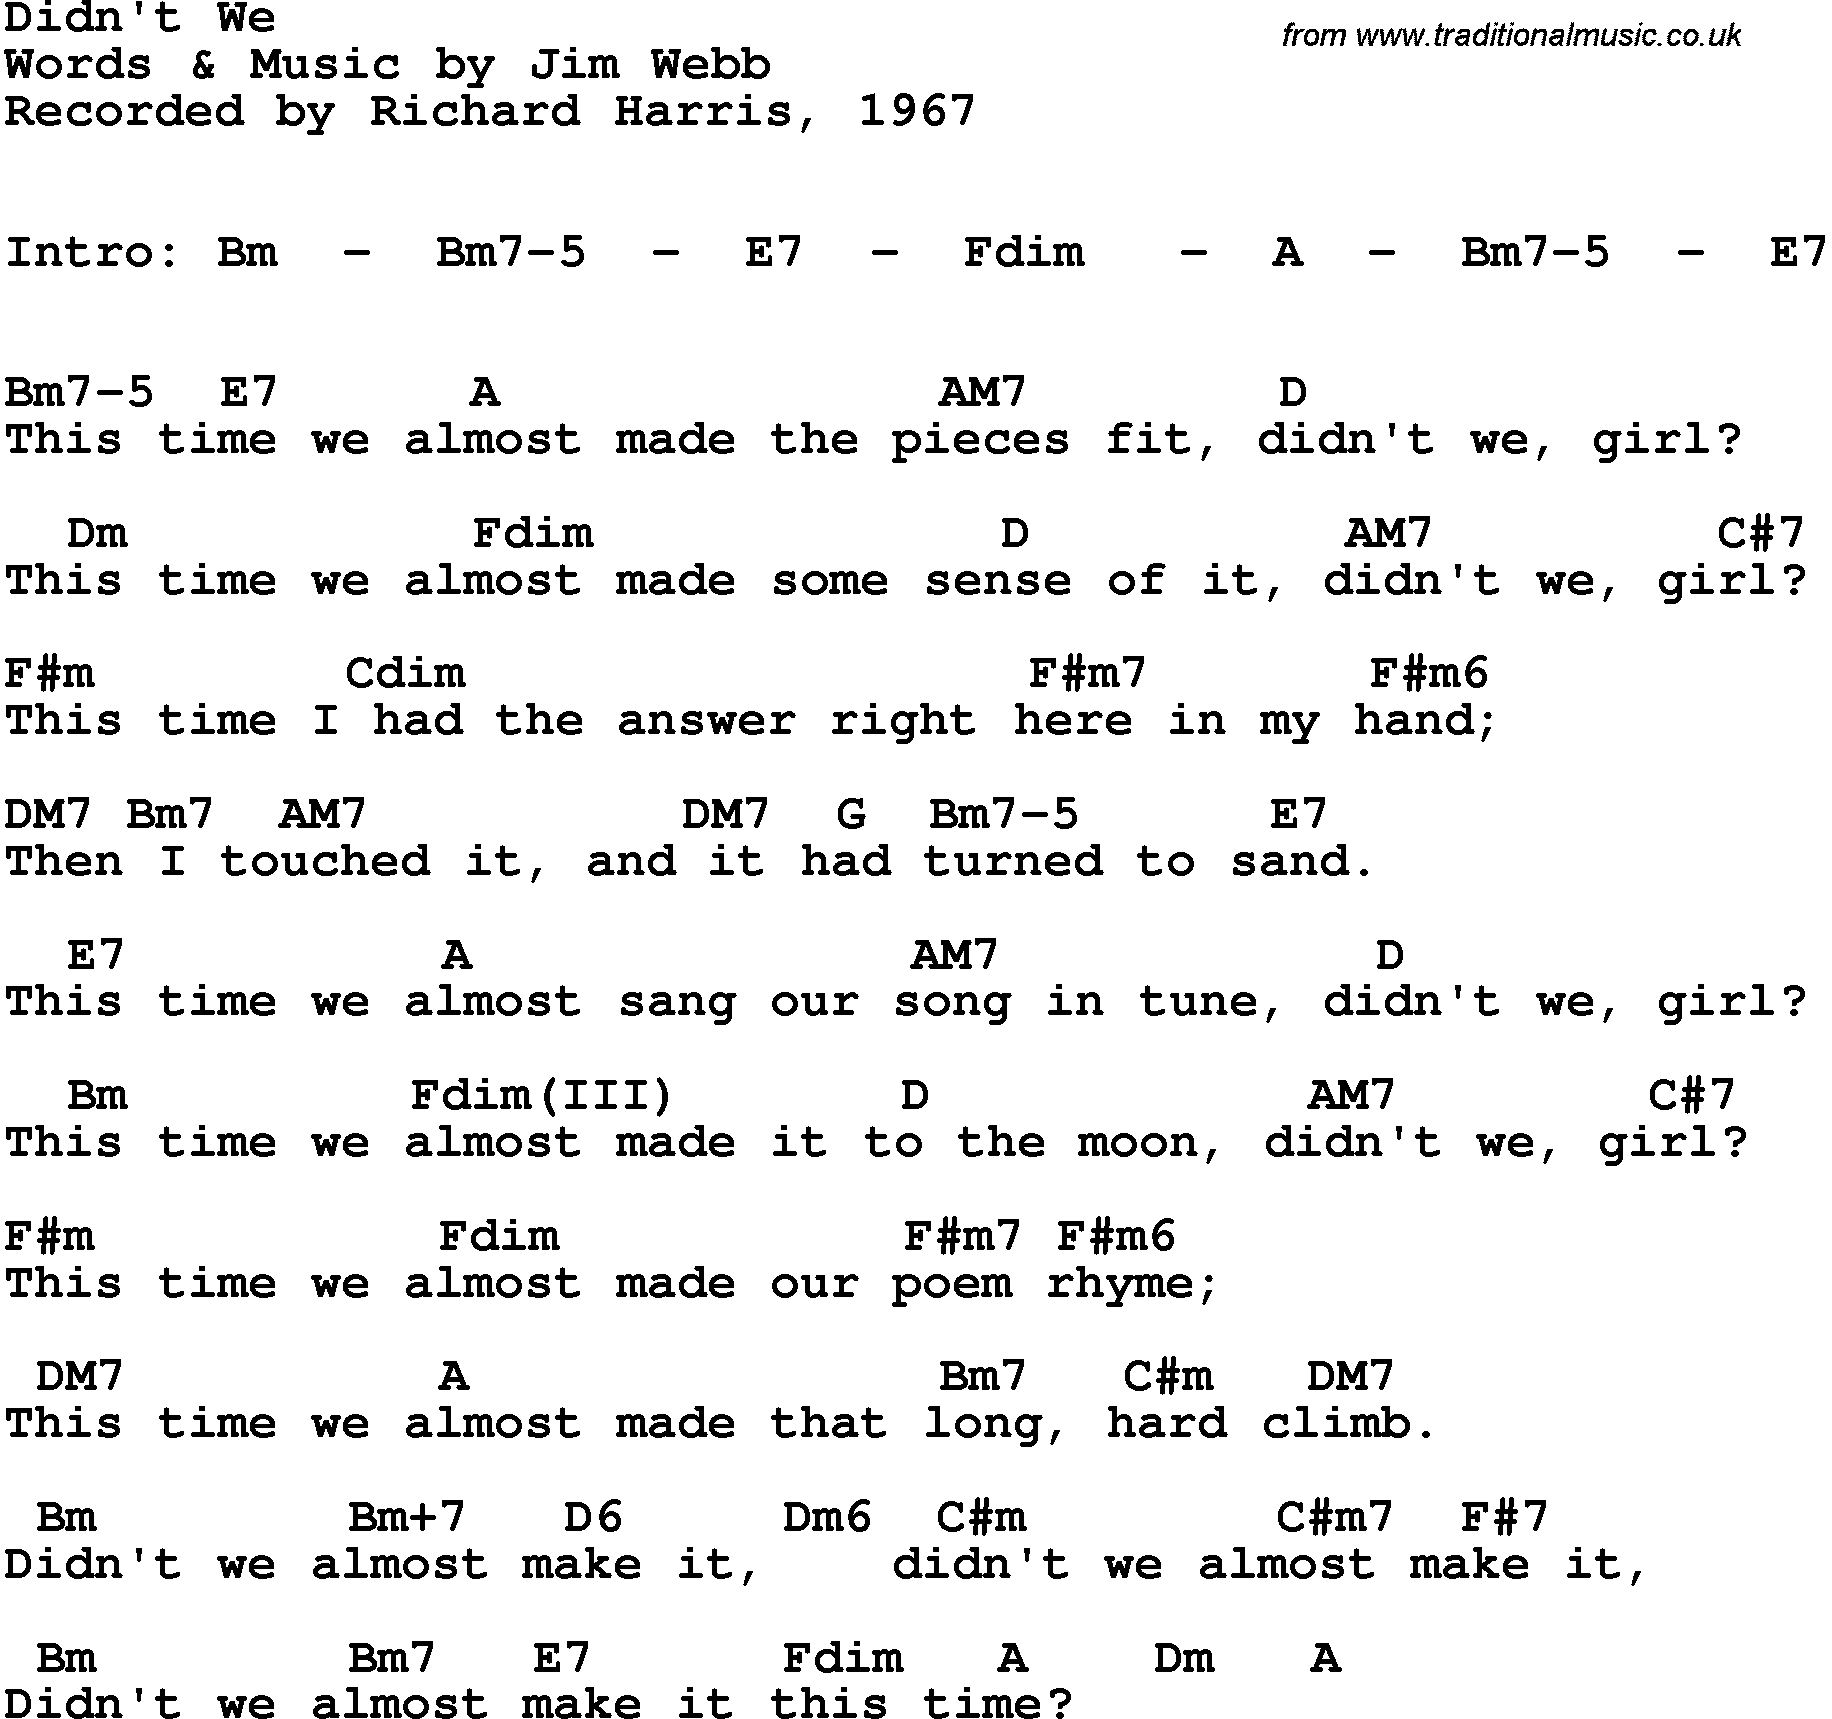 Song Lyrics with guitar chords for Didn't We - Richard Harris, 1967